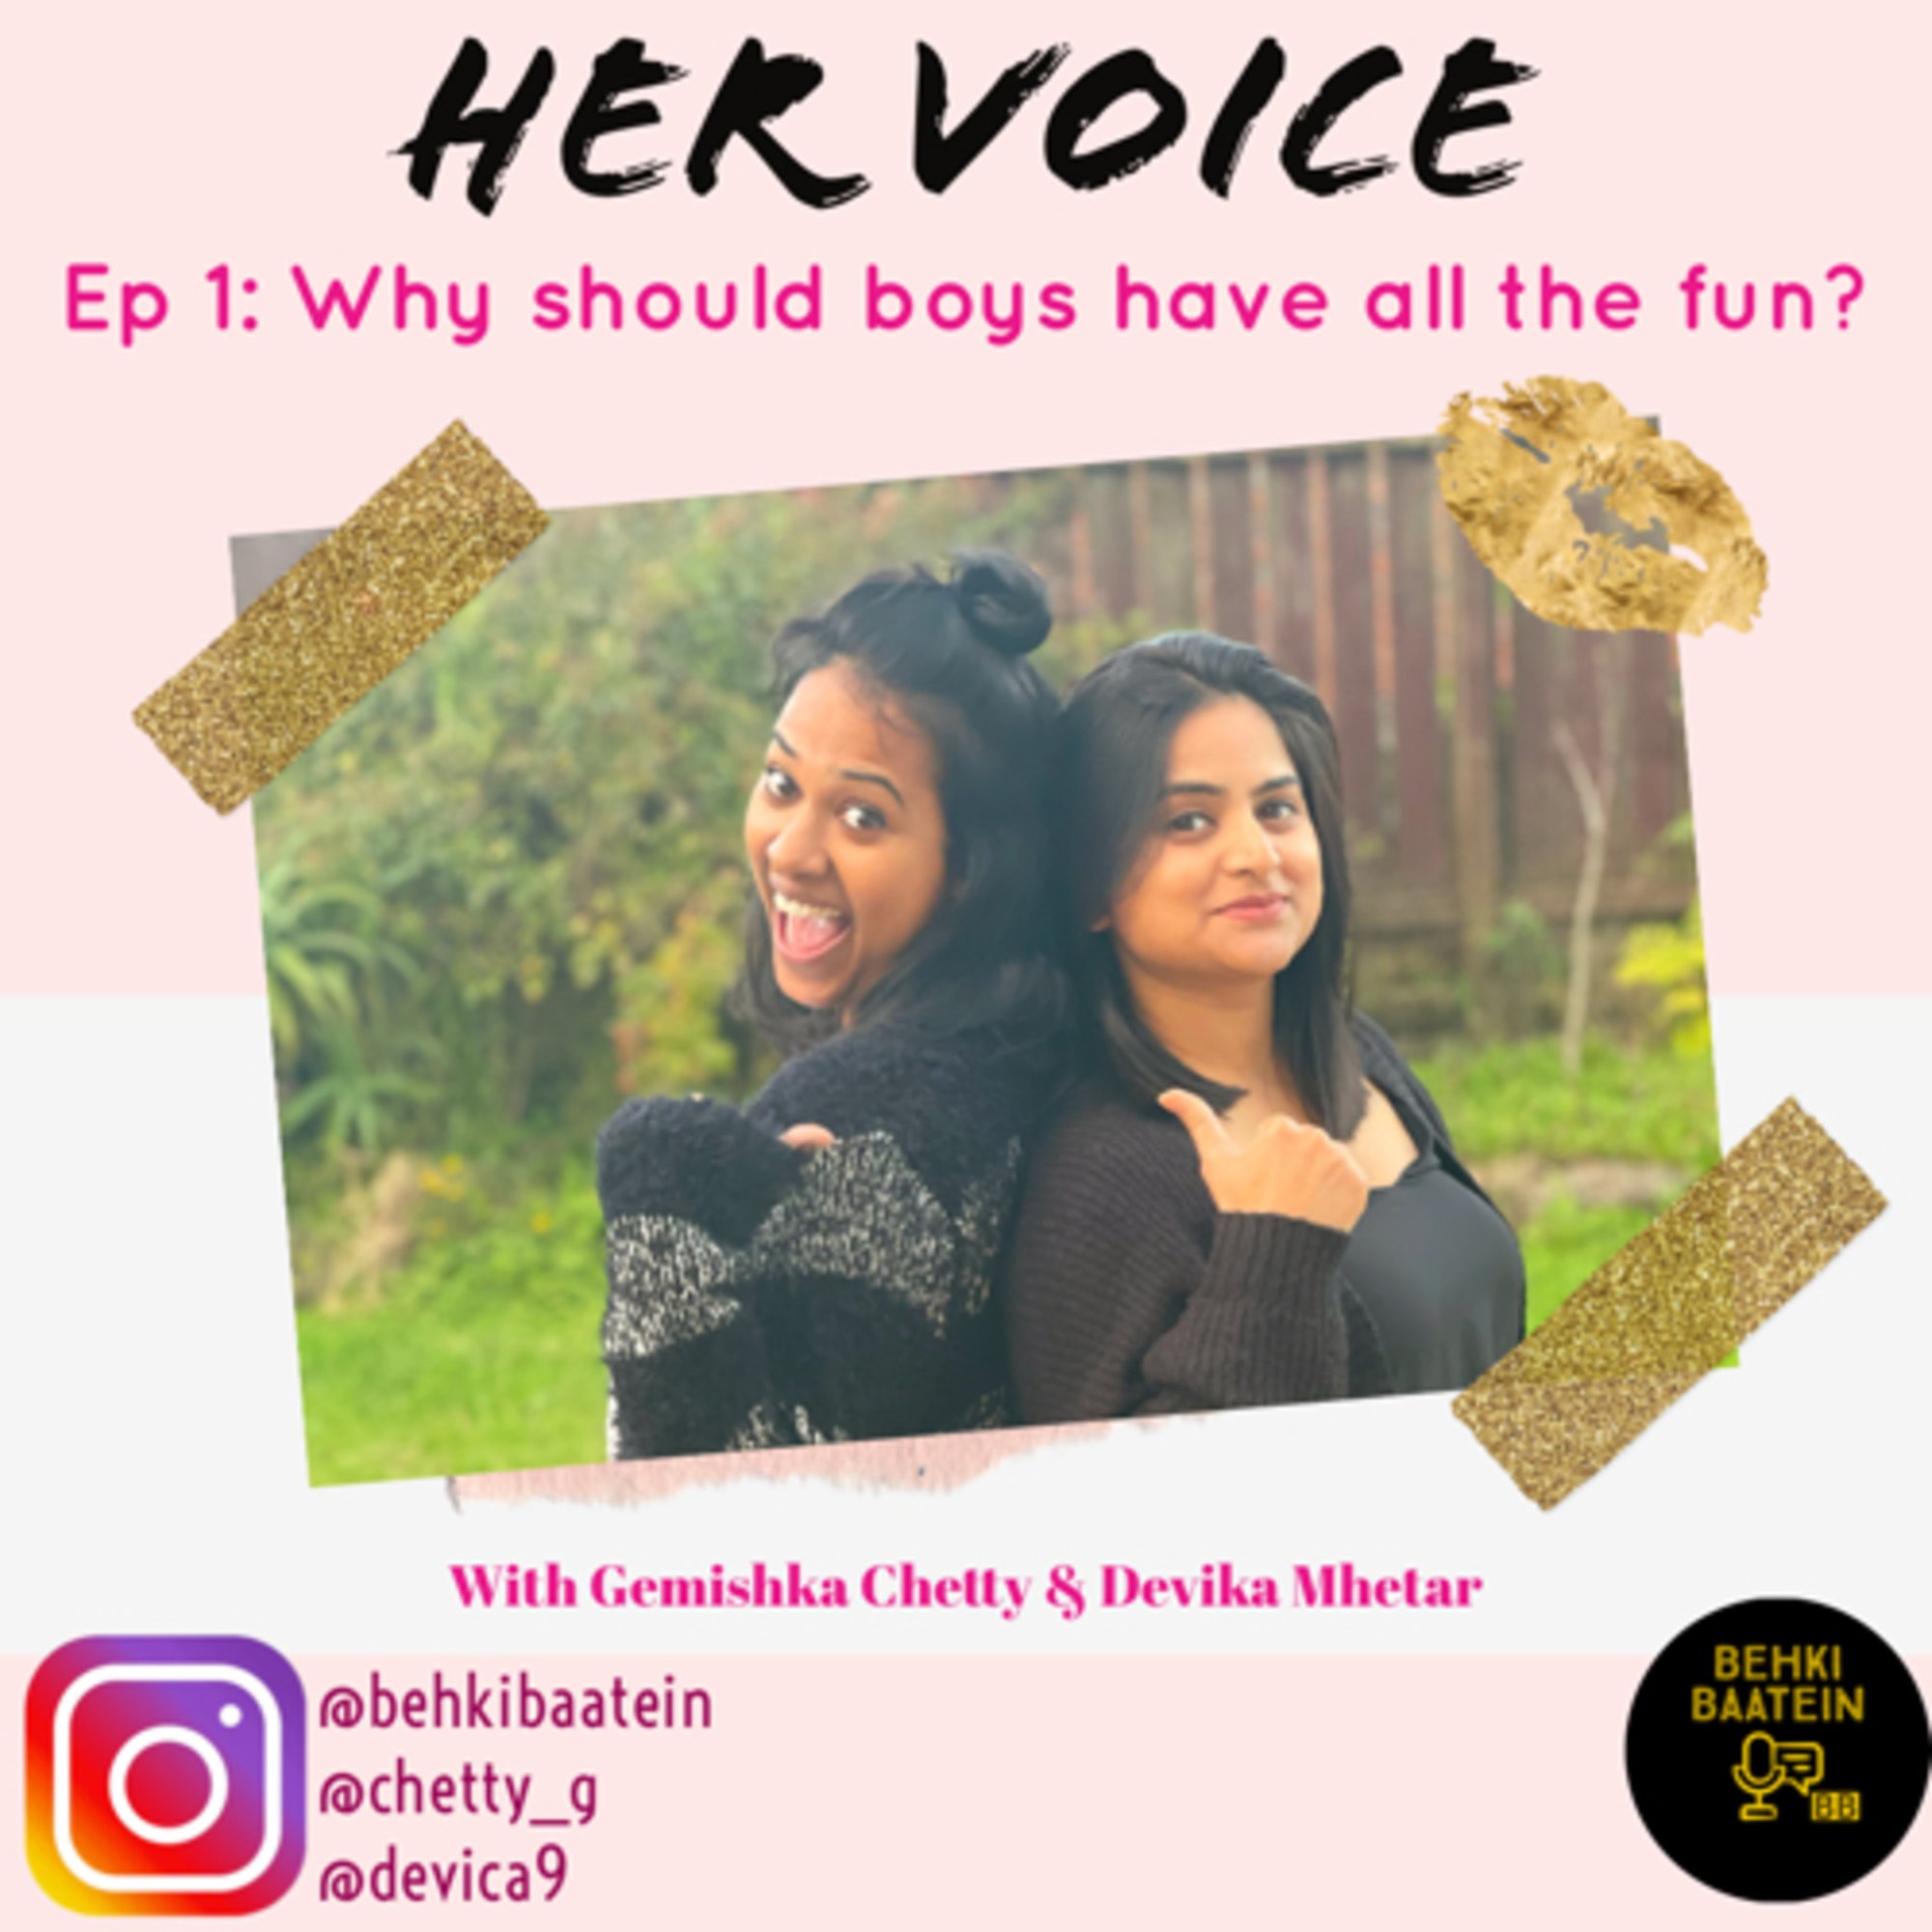 Ep 1: Her Voice - Why should boys have all the fun? With Devika Mhetar and Gemishka Chetty